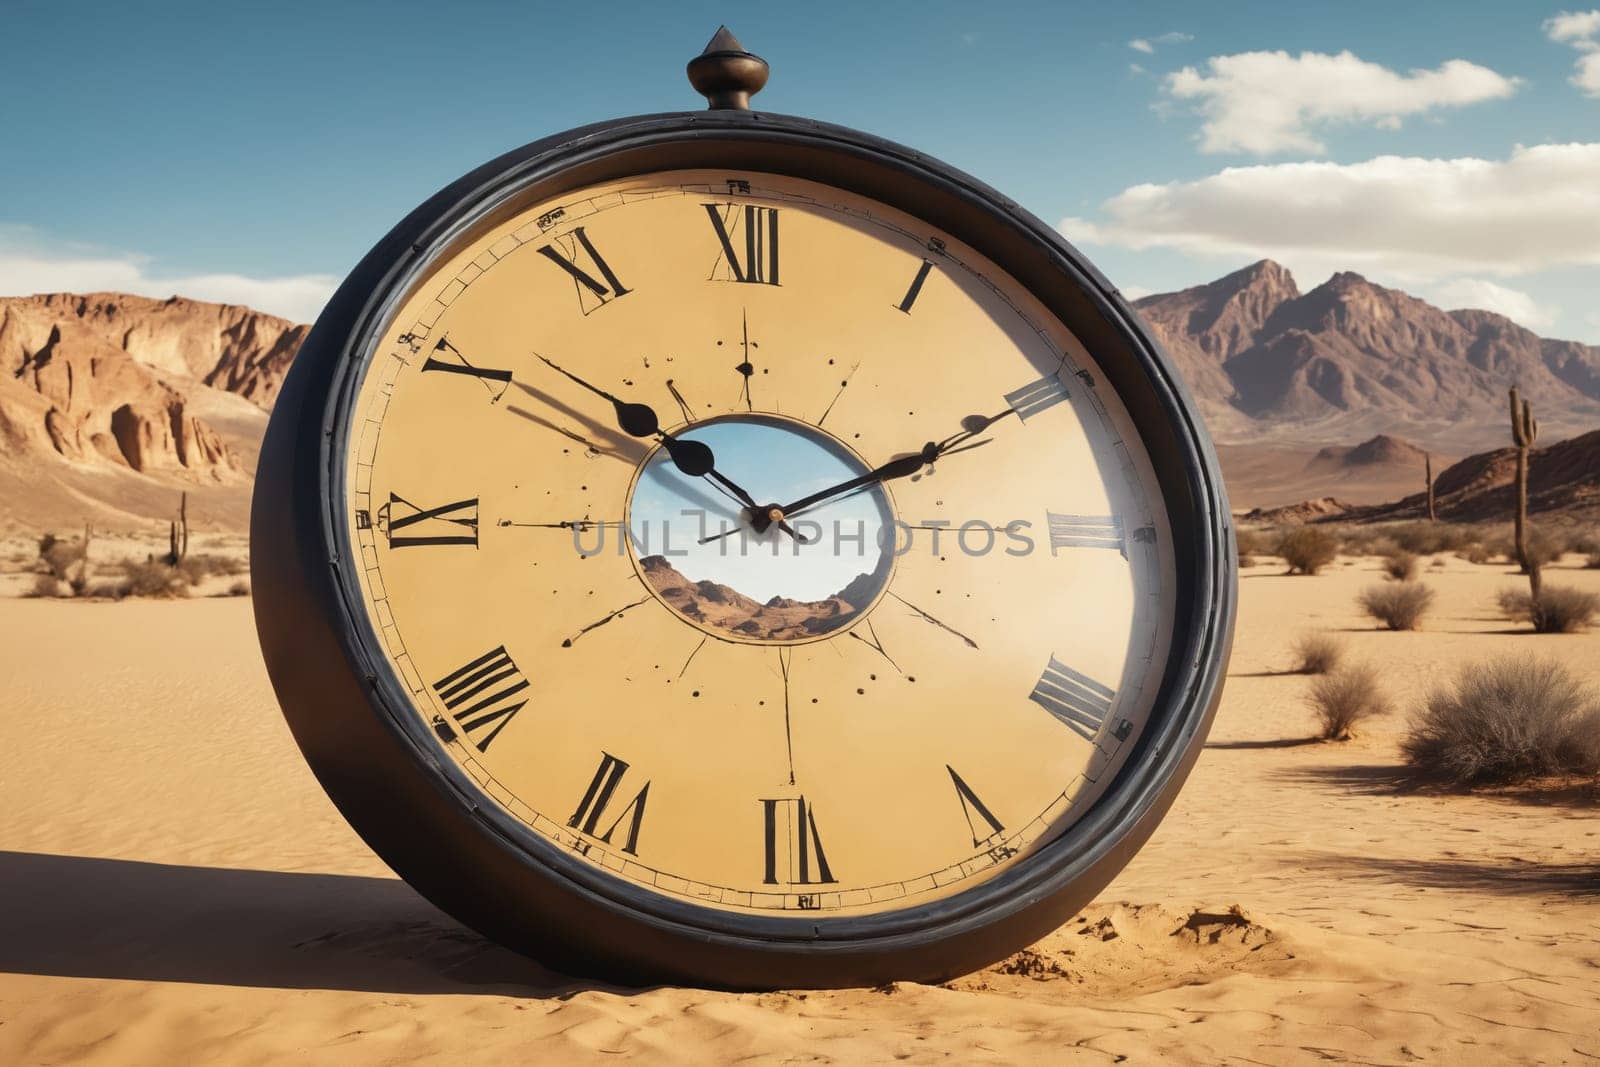 The Persistence of Time: Overlapping Realms of Desert and Clockwork by Andre1ns